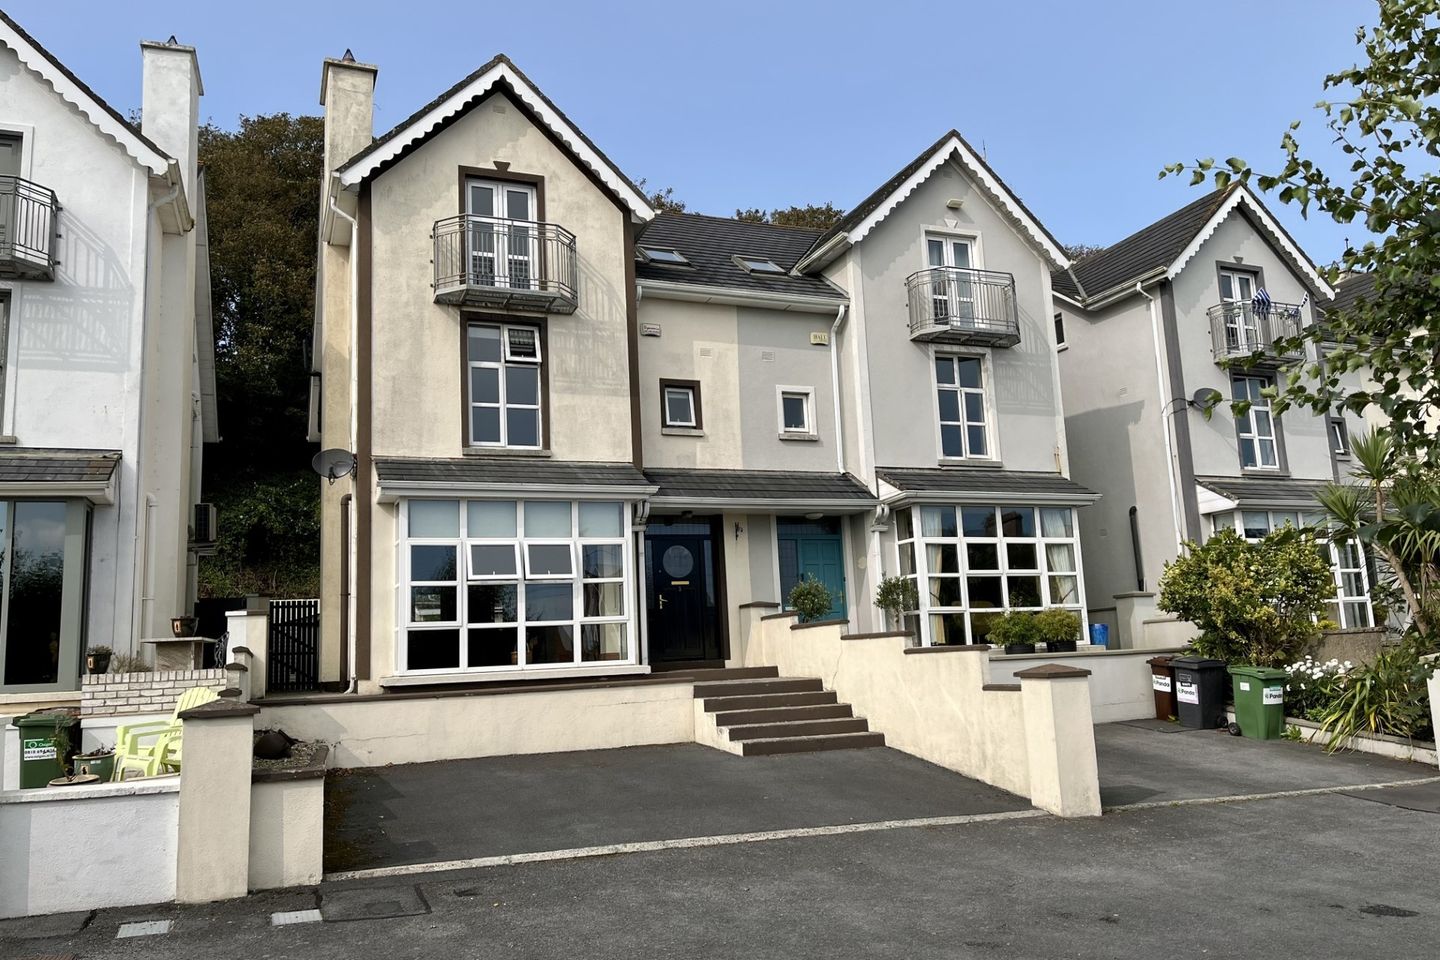 3 The Orchard, Waterford Road, Tramore, Co. Waterford, X91A6X8